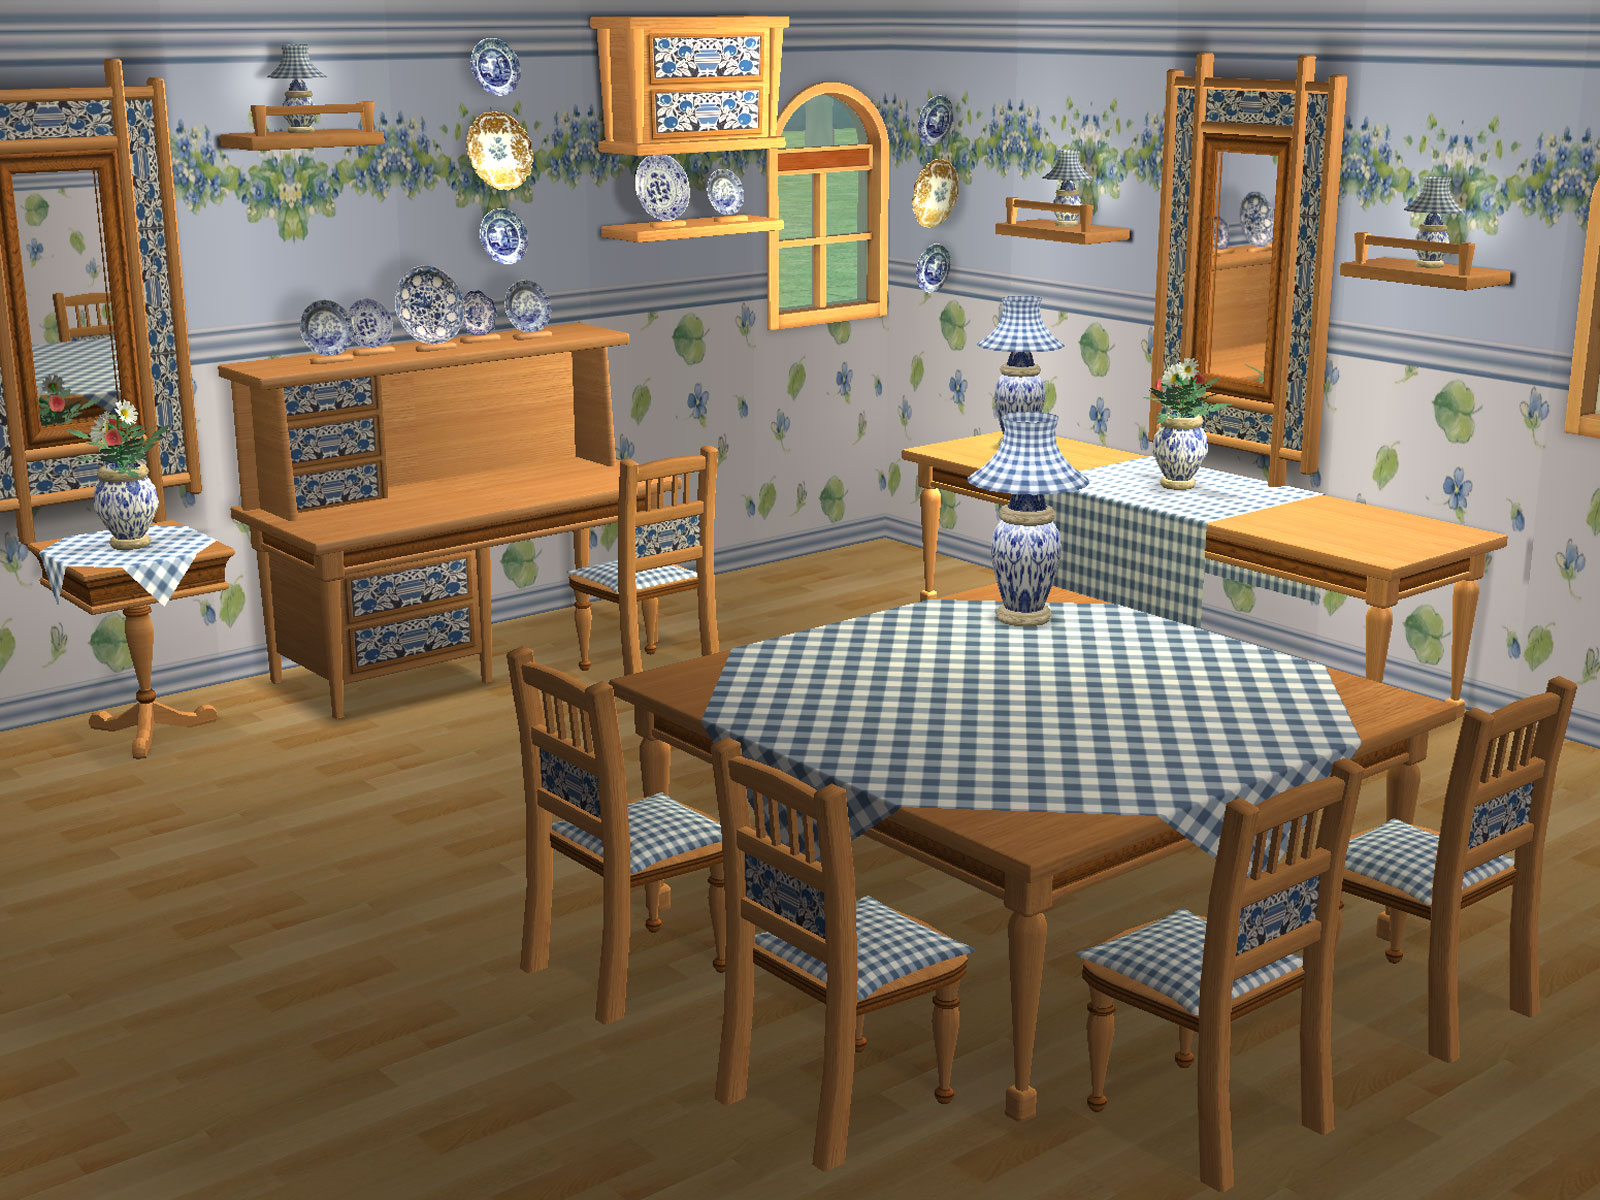 http://www.parsimonious.org/furniture2/files/k8-Chequered_Past_Dining.jpg